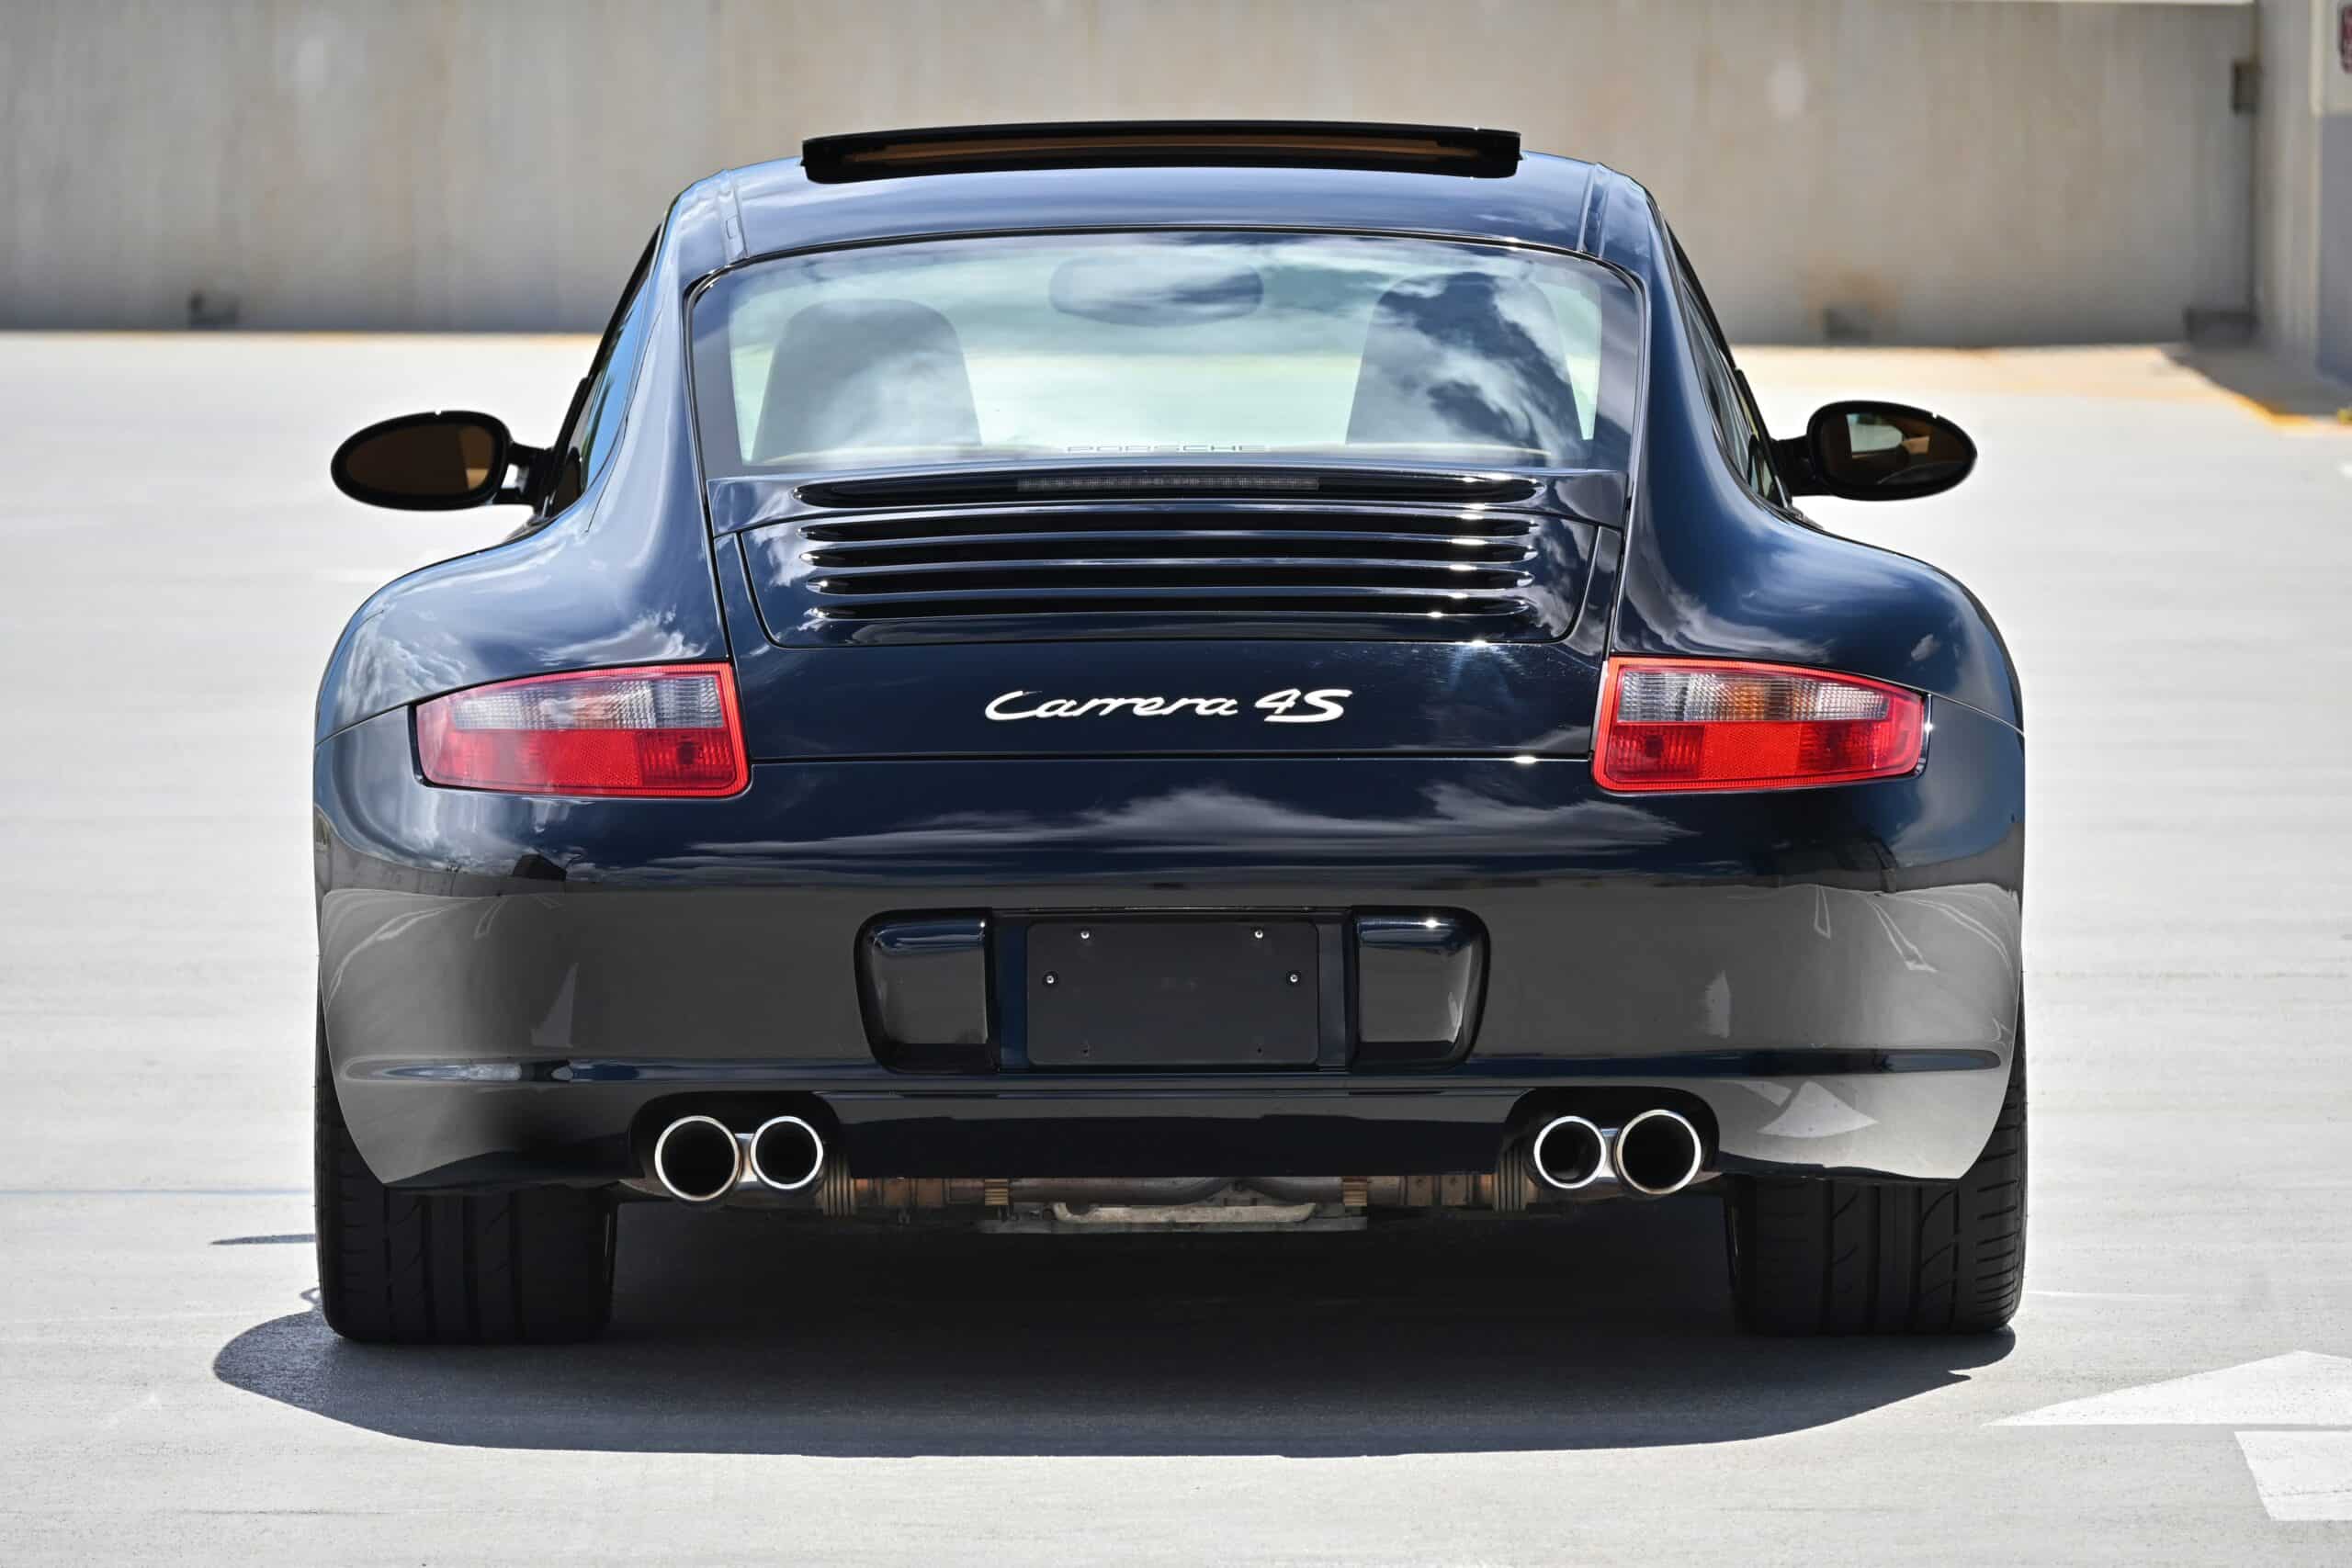 2006 Porsche 911 Carrera 4S 997  - 6 Speed Manual - Factory Widebody  Turbo Look - Only 43K Miles - Like NEW - RMCMiami